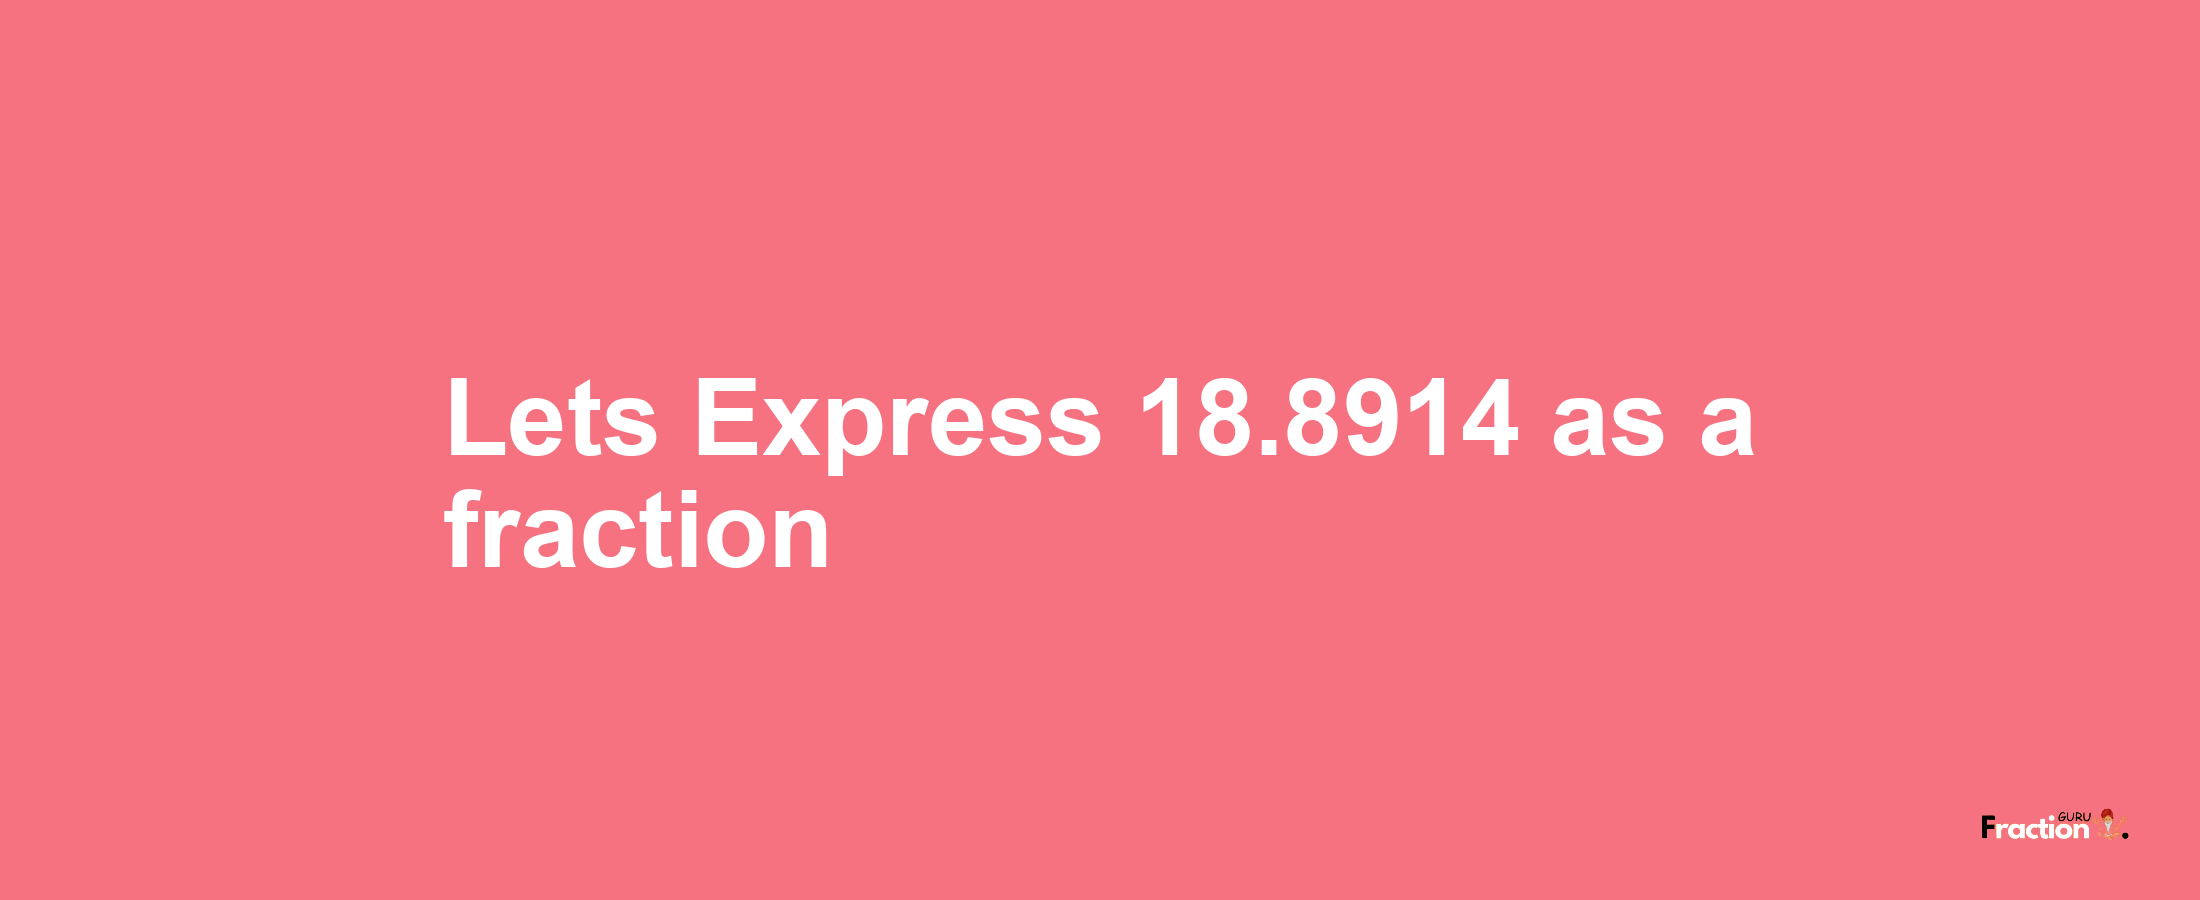 Lets Express 18.8914 as afraction